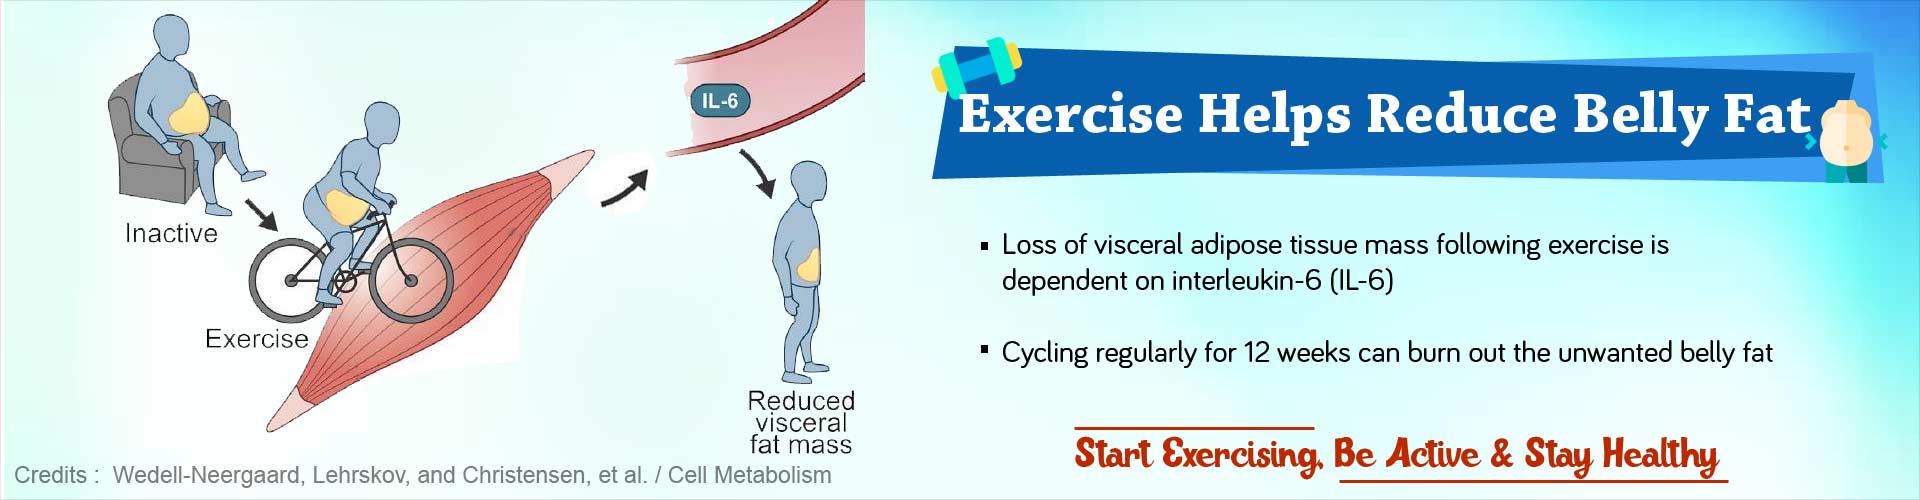 Exercise helps reduce belly fat. Loss of visceral adipose tissue mass following exercise is dependent on interleukin-6 (IL-6). Cycling regularly for 12 weeks can burn out the unwanted belly fat. Start exercising, be active and stay healthy.